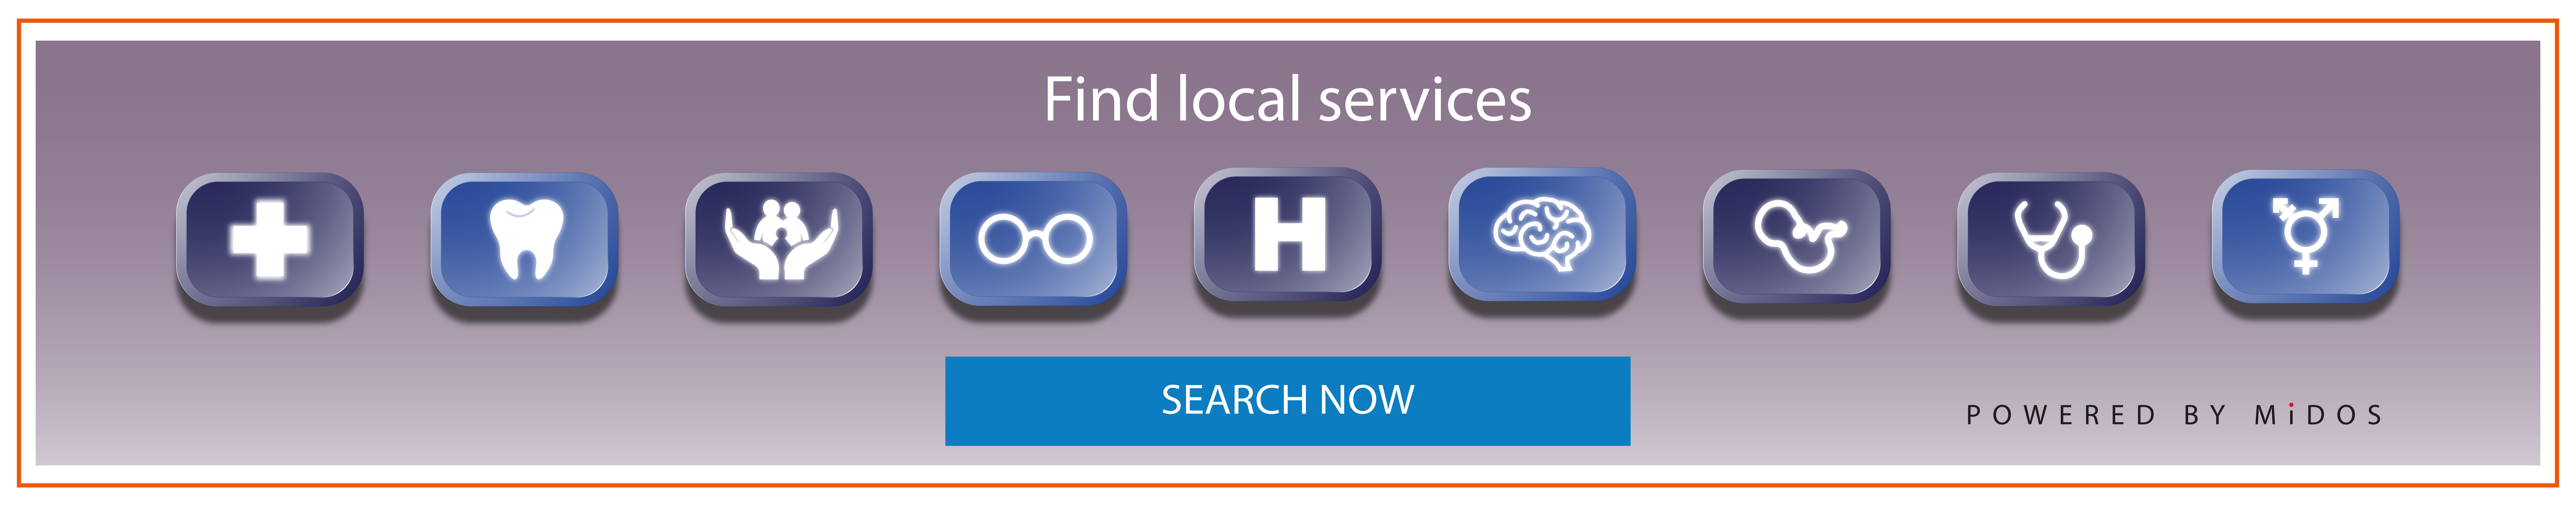 click on this image to find out your local NHS service near you